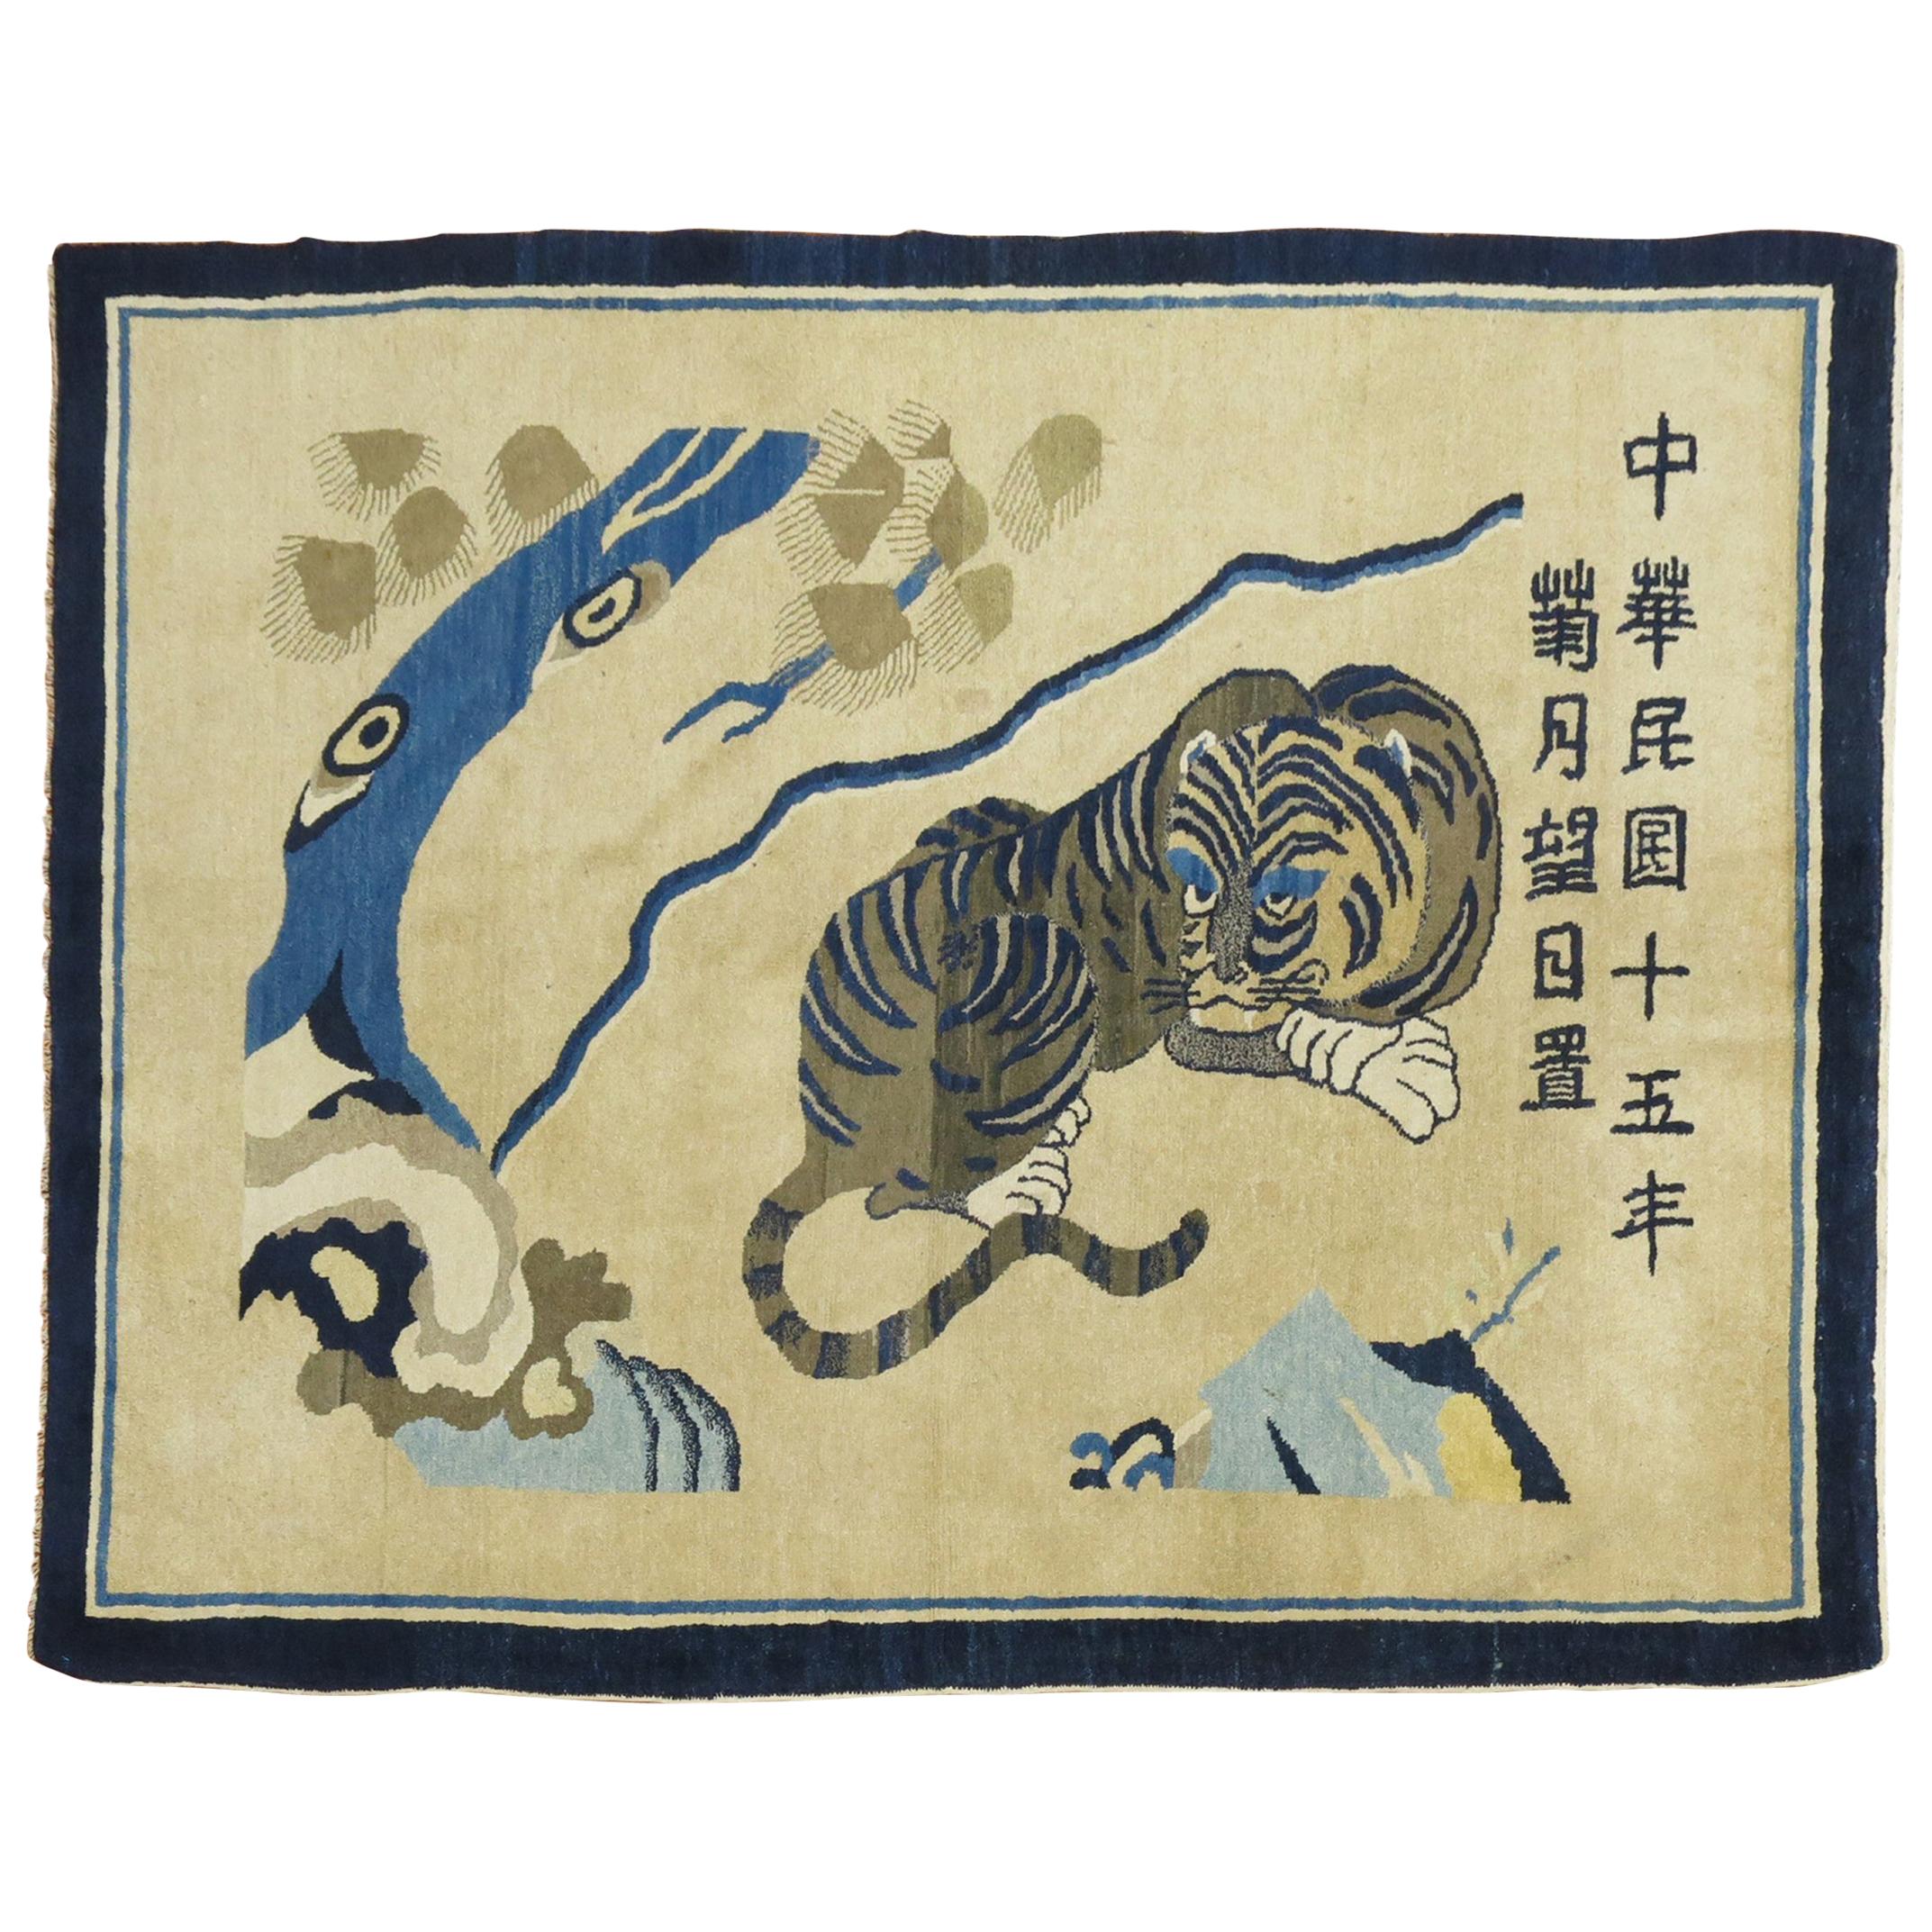 Spiritual Chinese Antique Tiger Pictorial Rug, Dated 1926